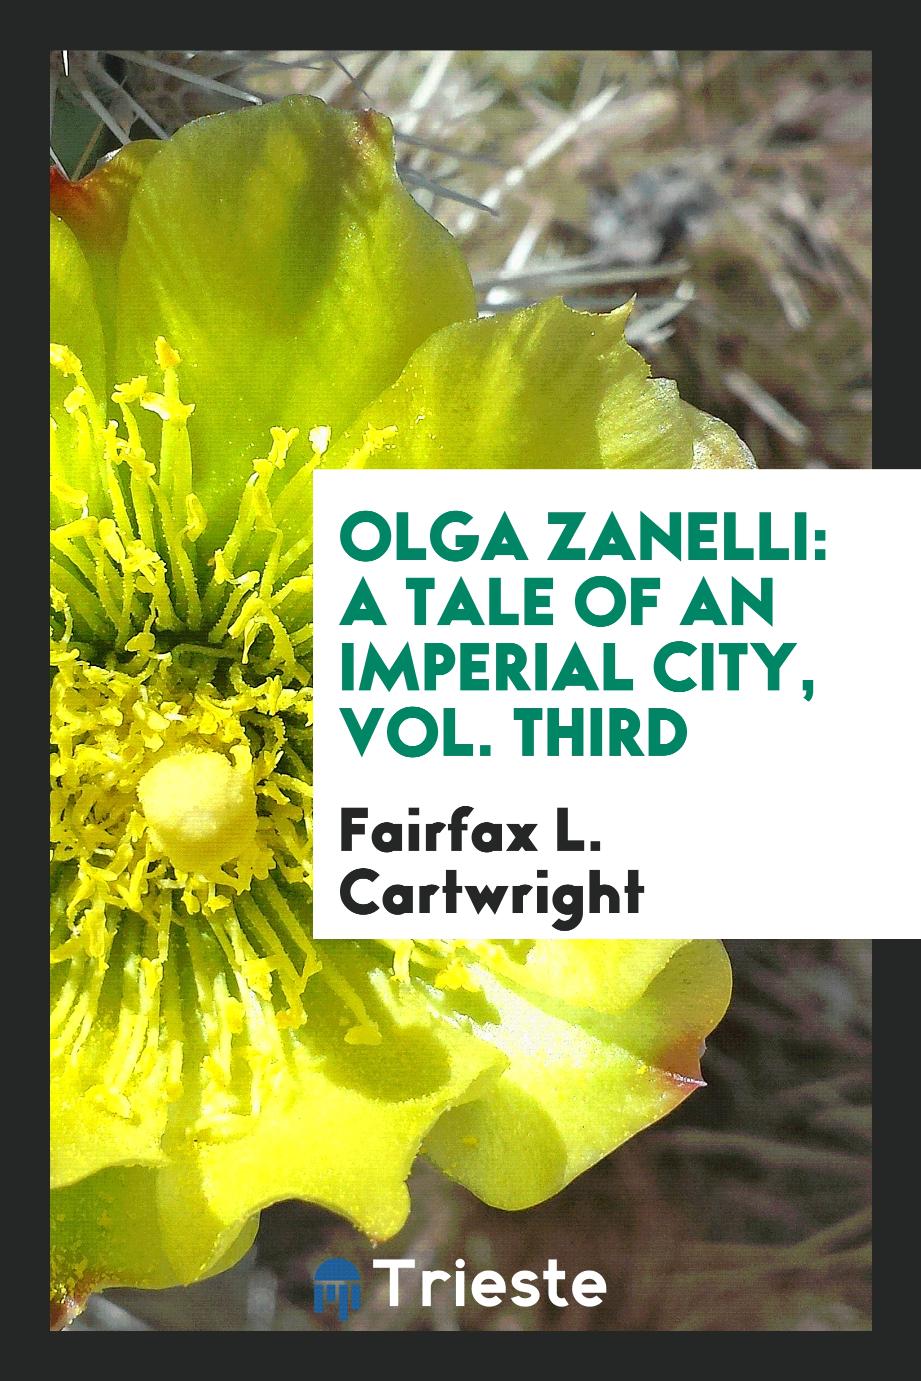 Olga Zanelli: a tale of an imperial city, Vol. third